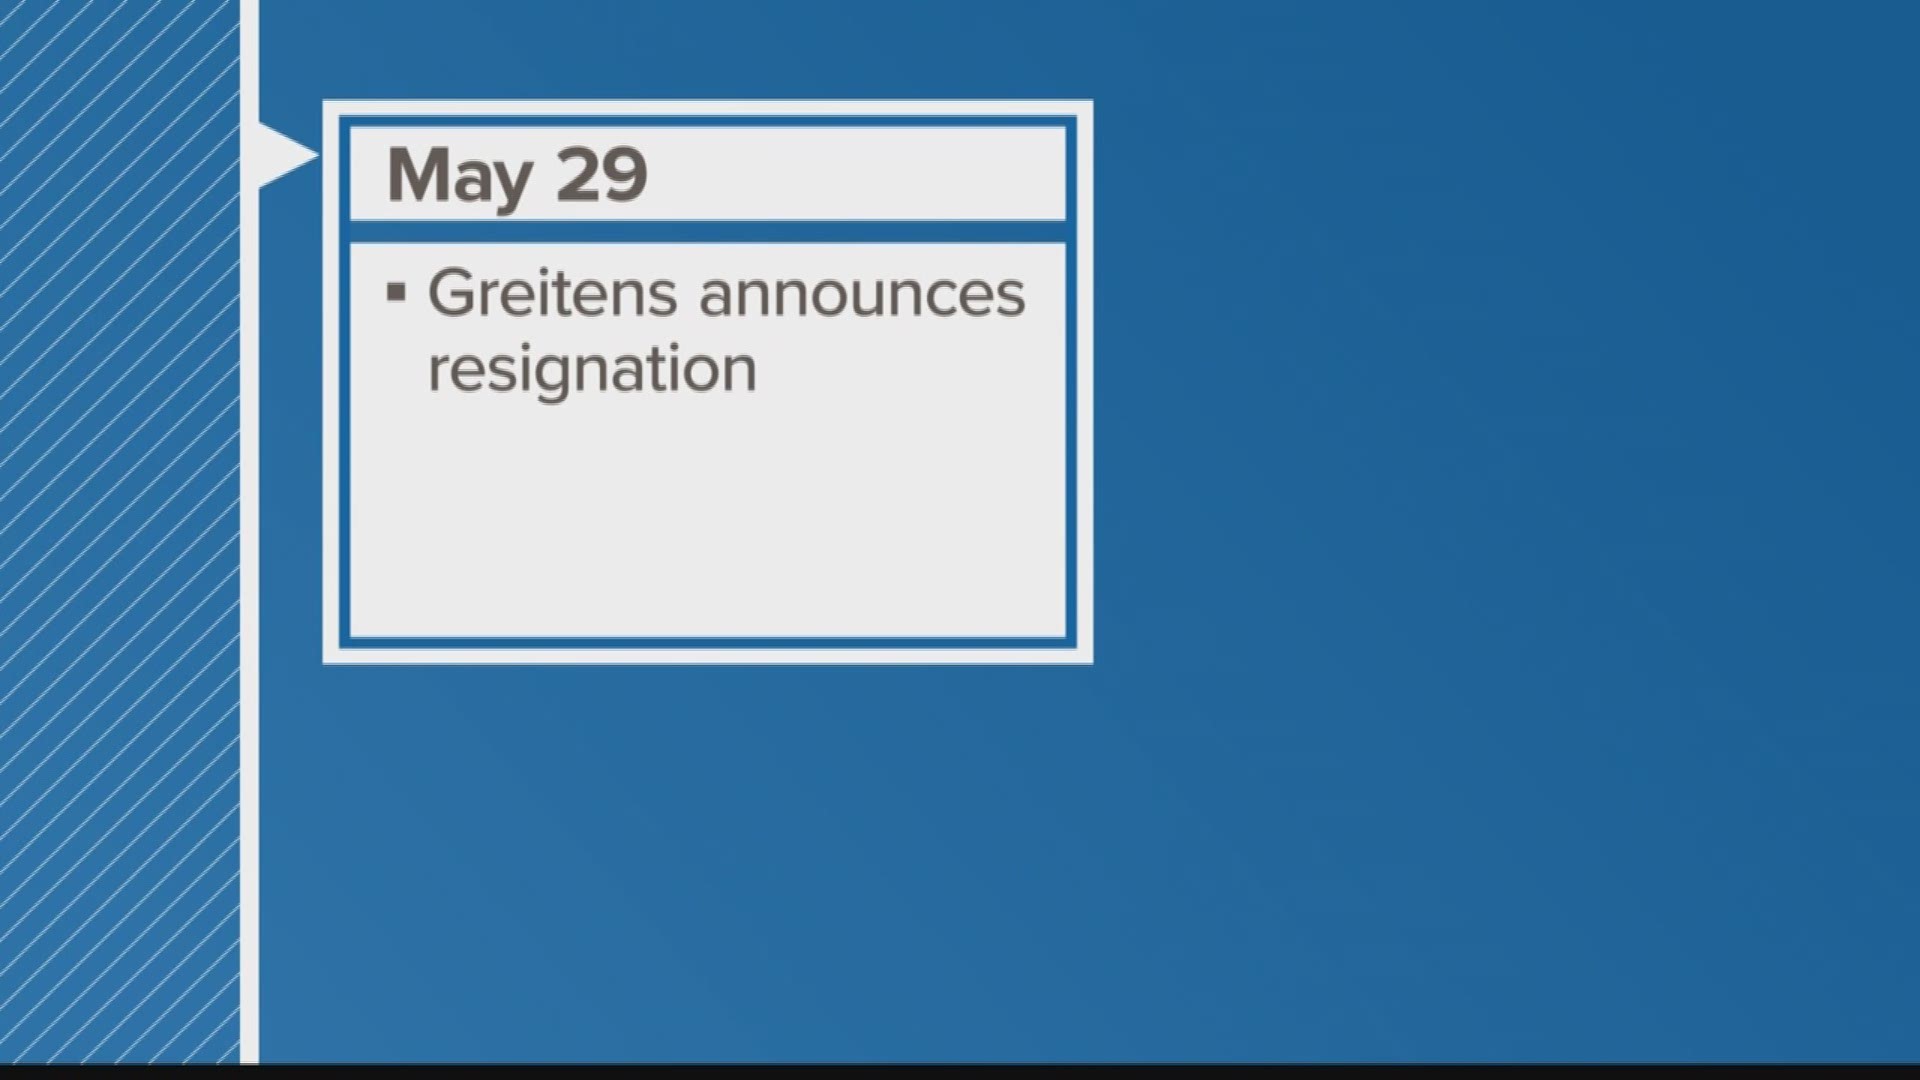 The events leading up to the governor's resignation started back in January.